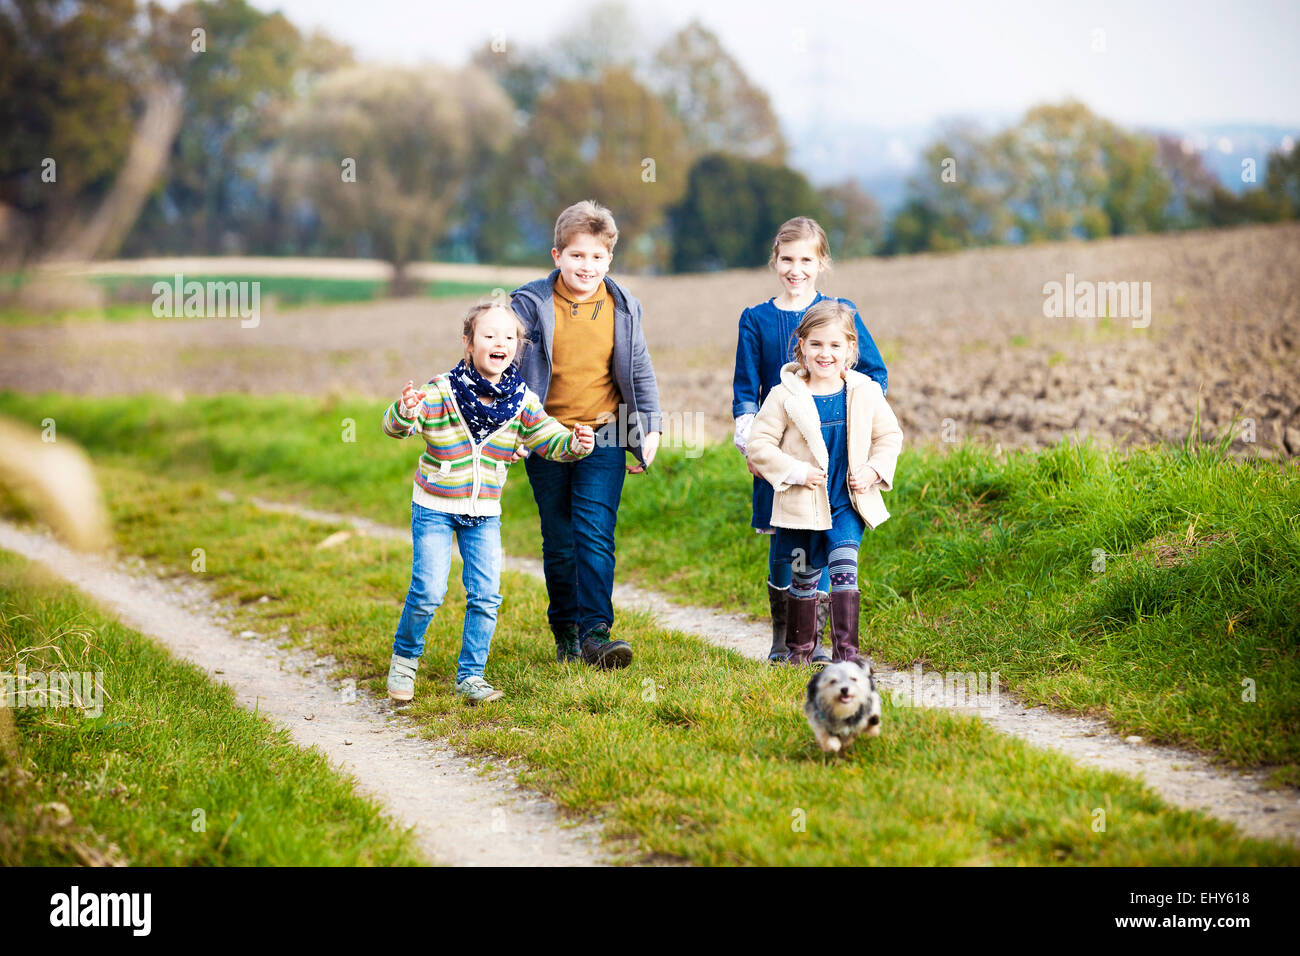 Children playing with dog outdoors Stock Photo